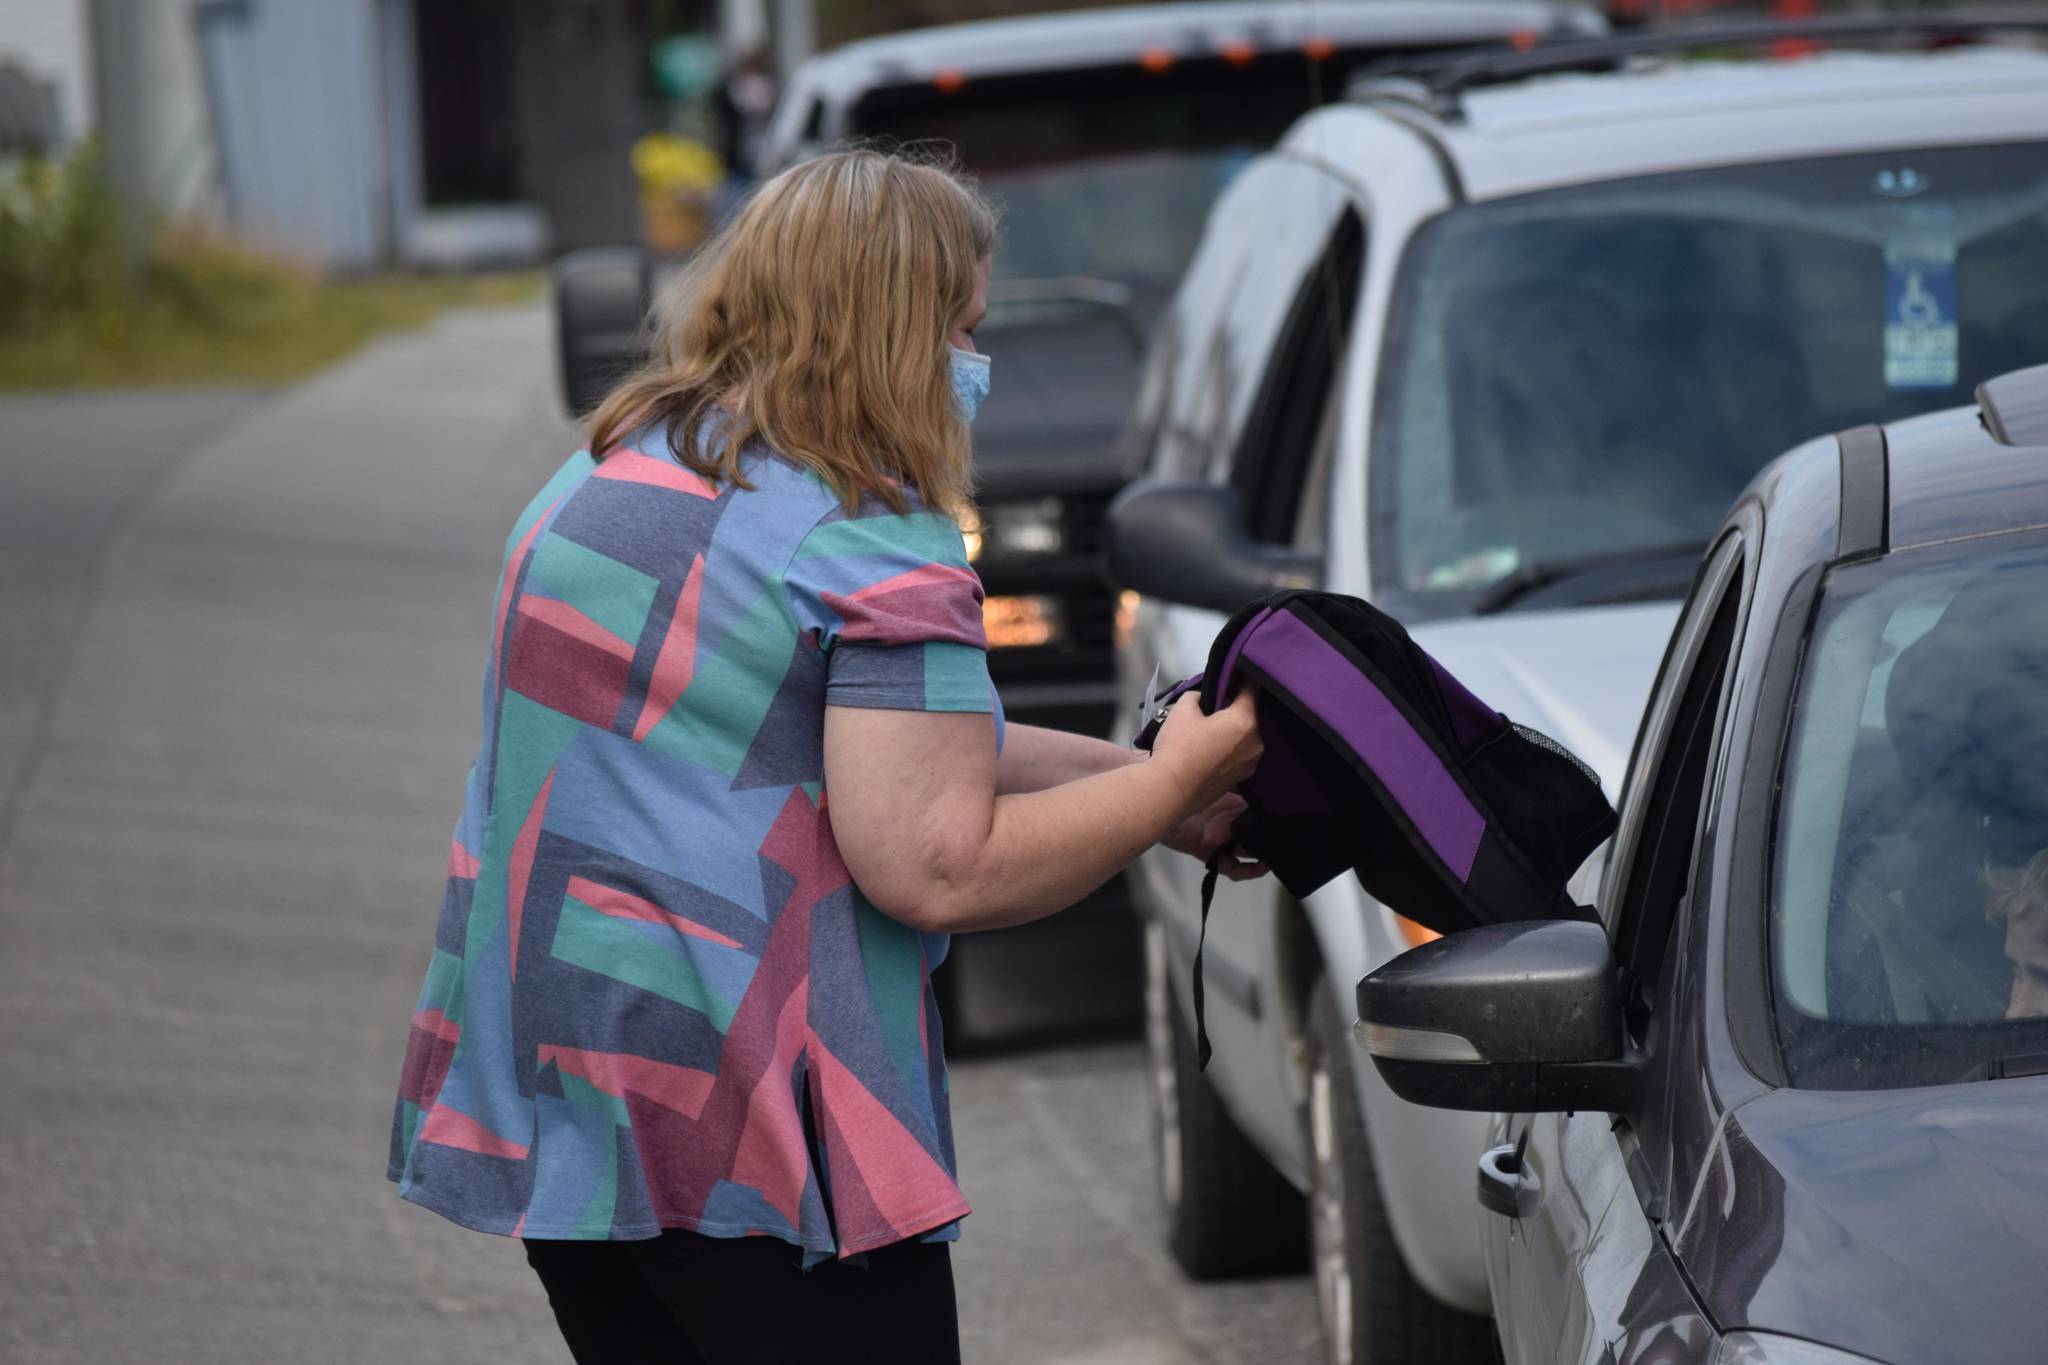 Joanne Jenkins distributes backpacks and school supplies to a line of cars at the Peninsula Community Health Services KidFest event on Wednesday, Aug. 4, 2021 in Kenai, Alaska. (Camille Botello/Peninsula Clarion)